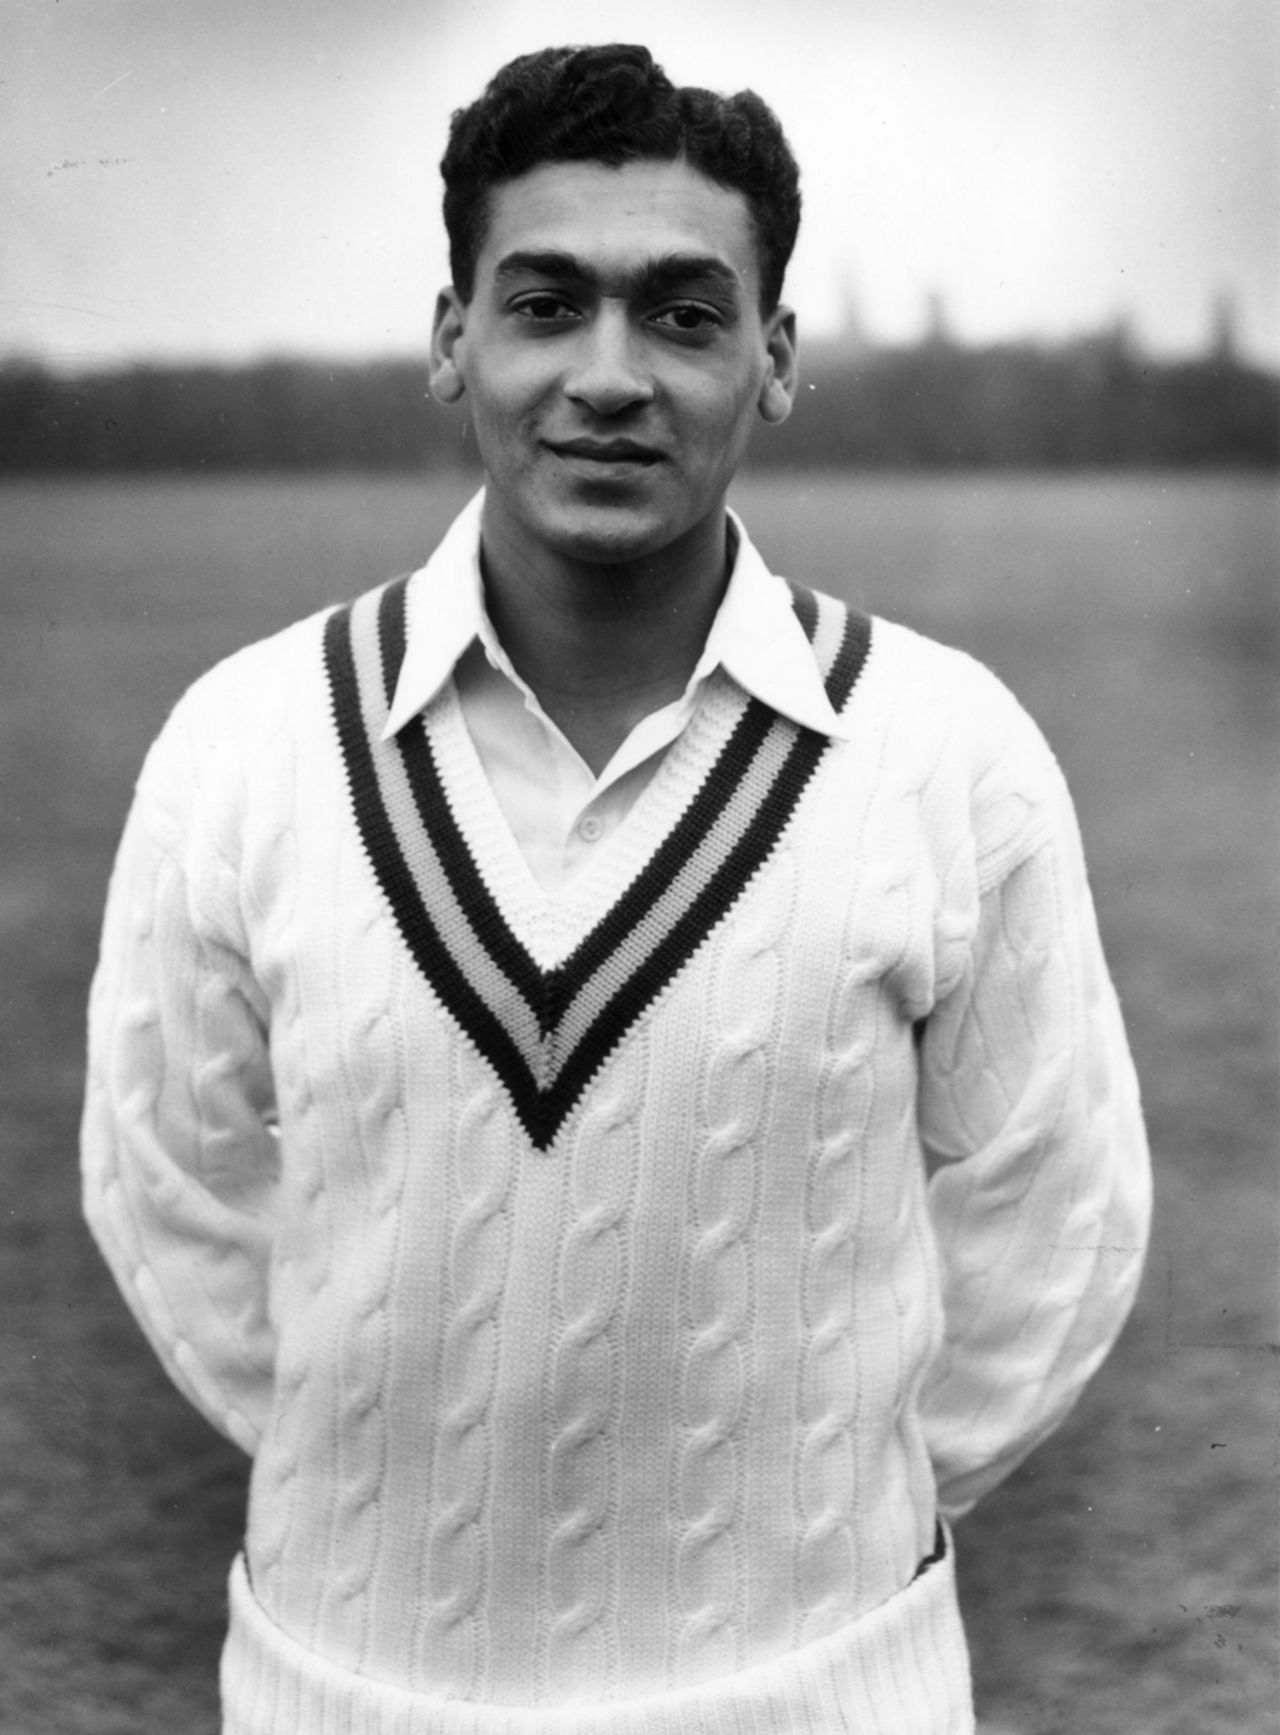 Khalid Hassan played one Test for Pakistan at the age of 16, May 5, 1954